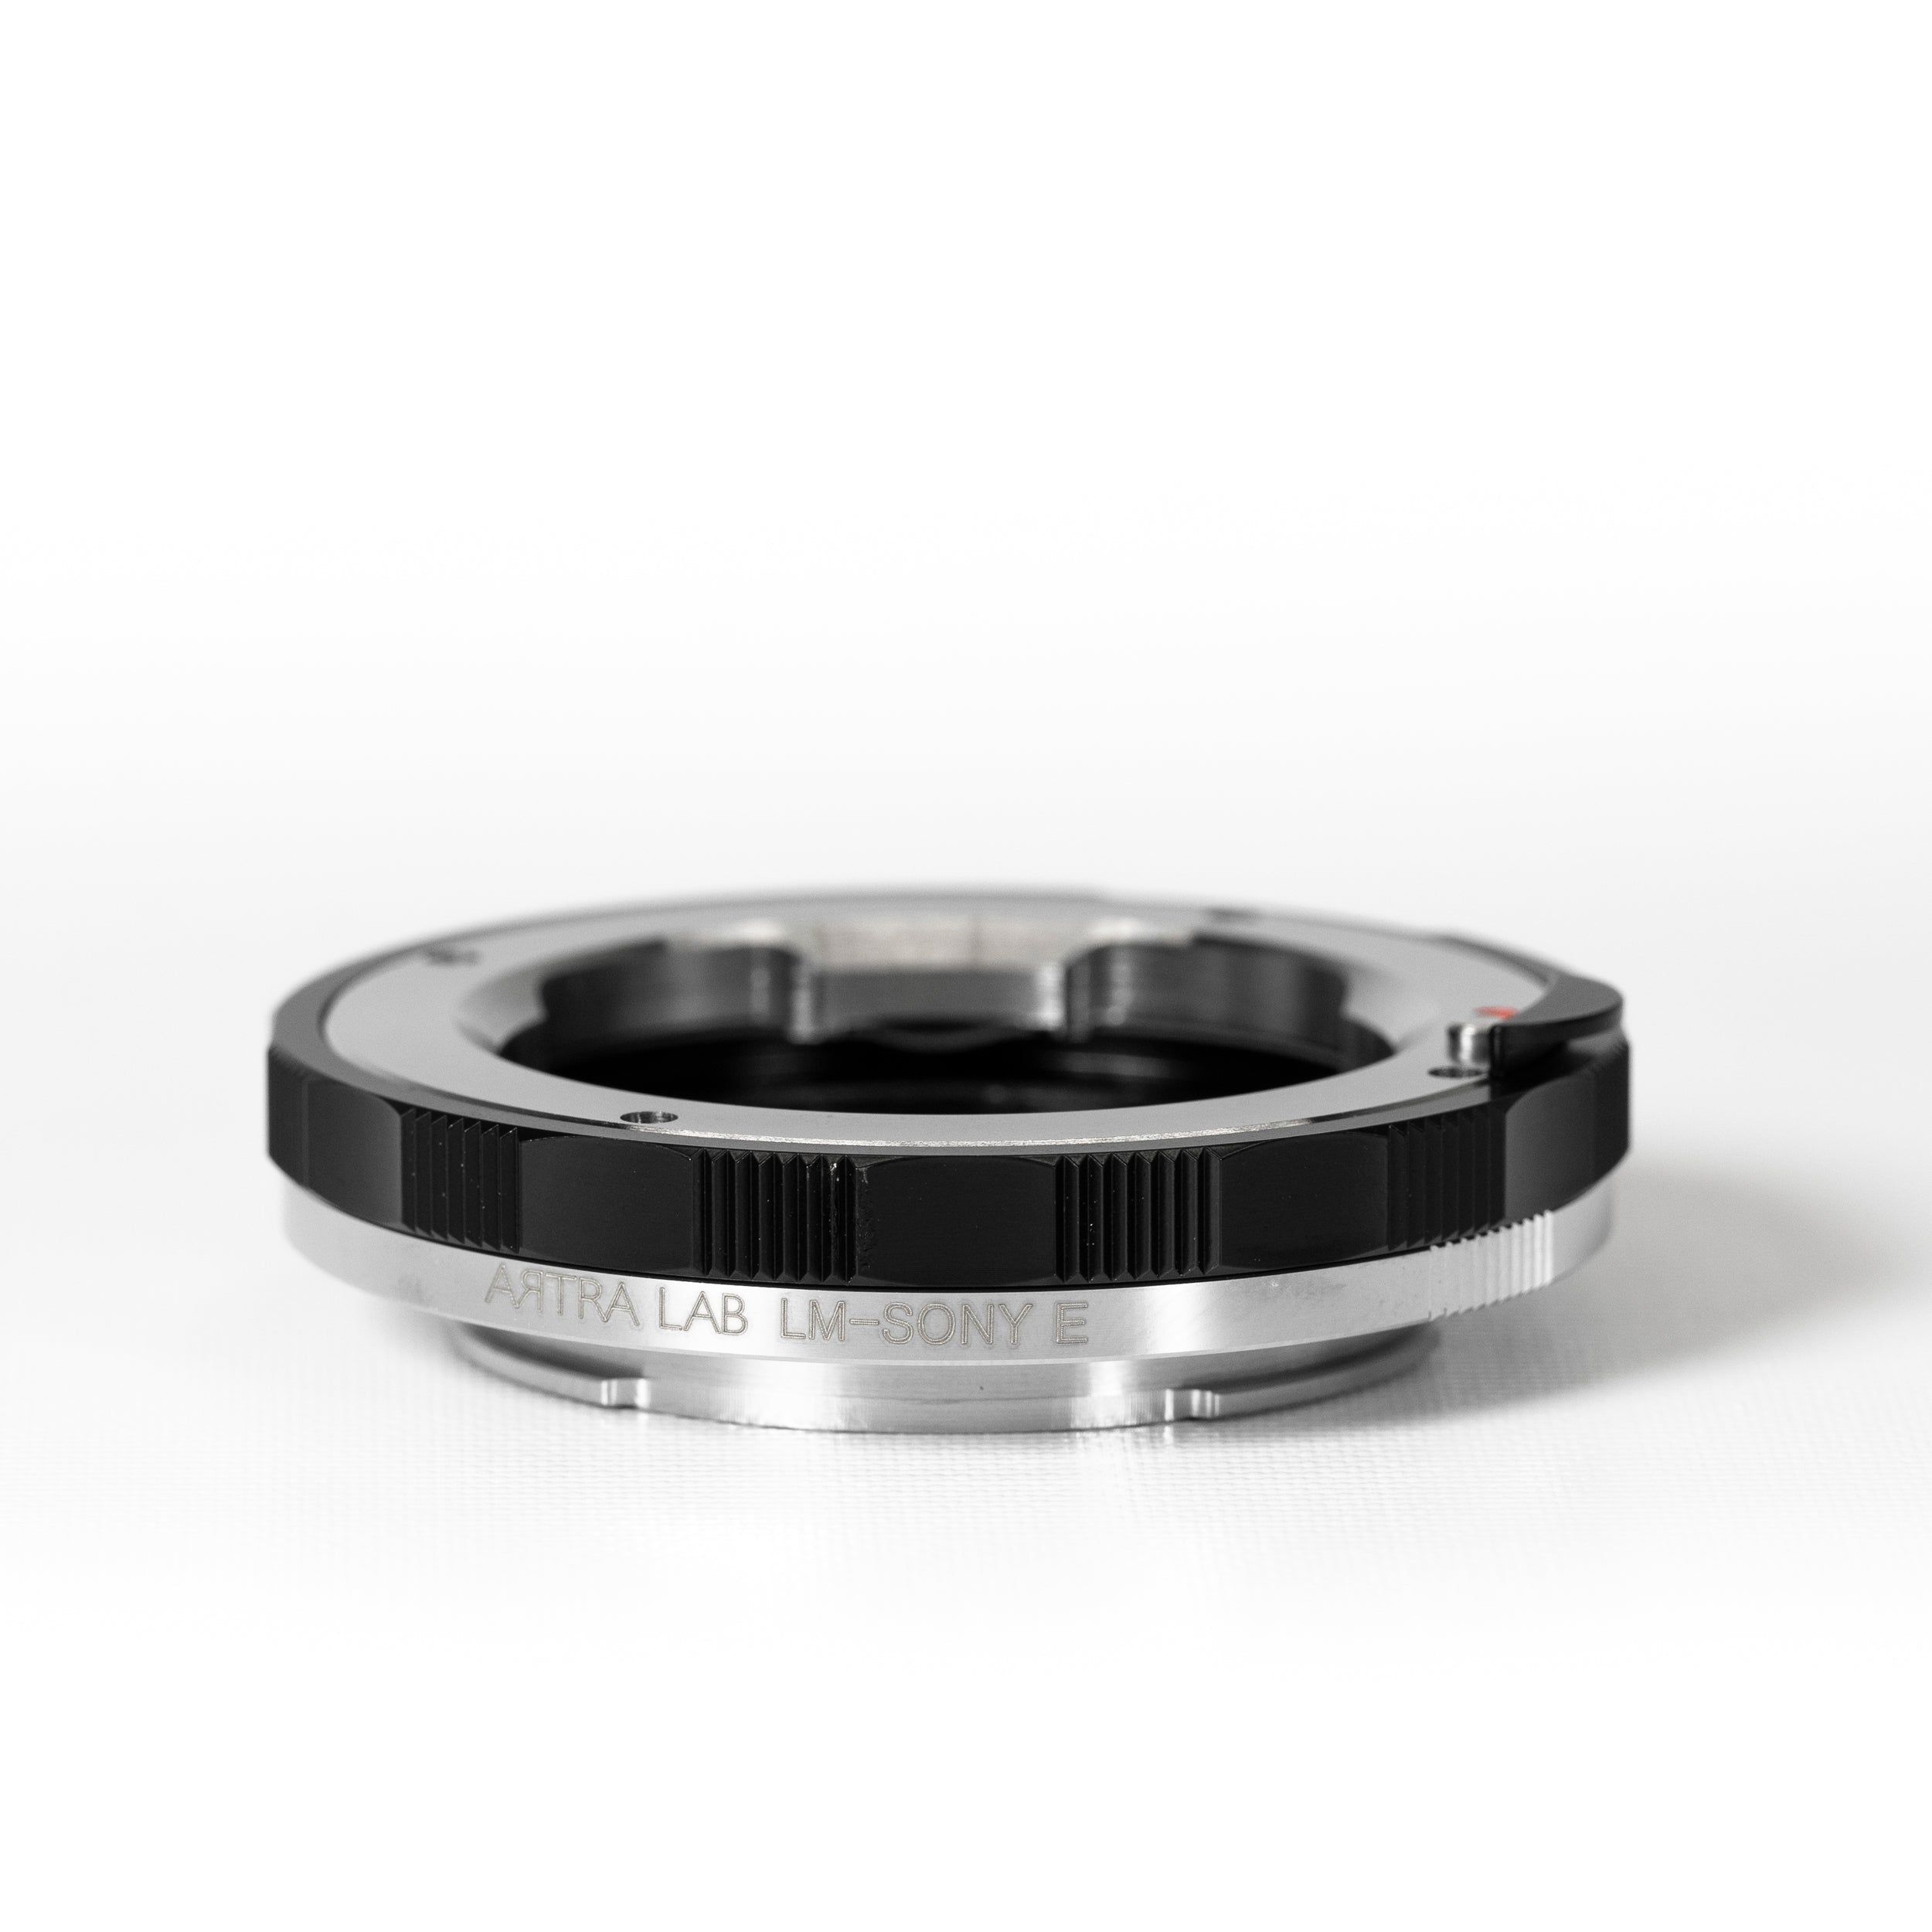 ARTRA LAB Leica M Mount to Sony E Mount Body Macro (Infinity lock function) Close Focus Adapter